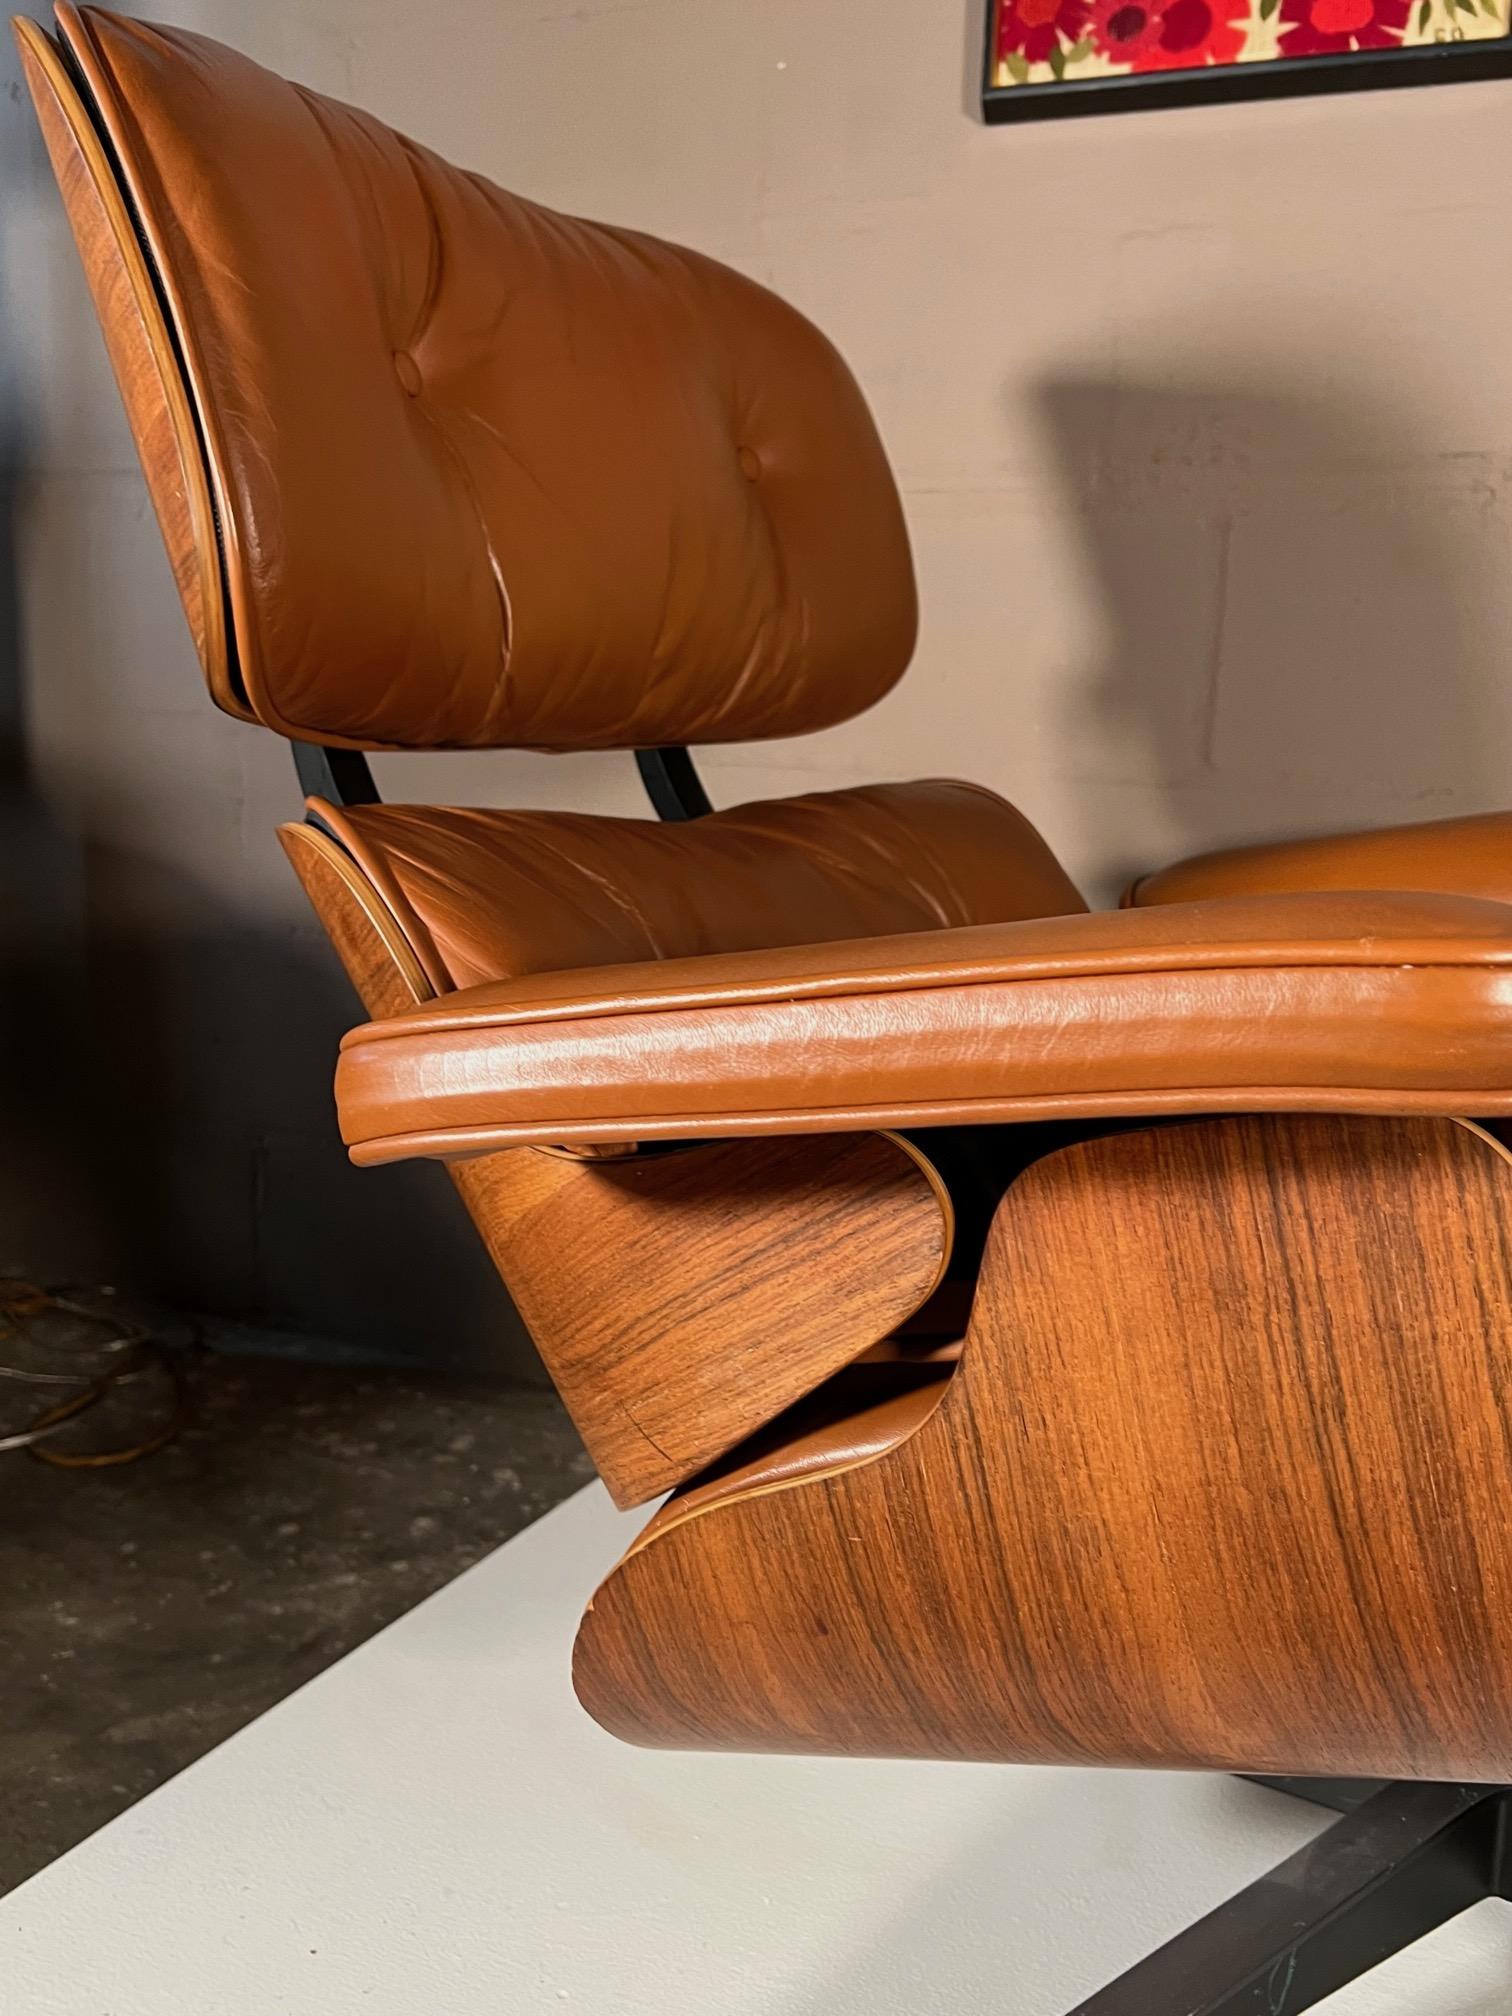 Classic Charles Eames Herman Miller Lounge Chair 1980's Cognac Brown Leather 13